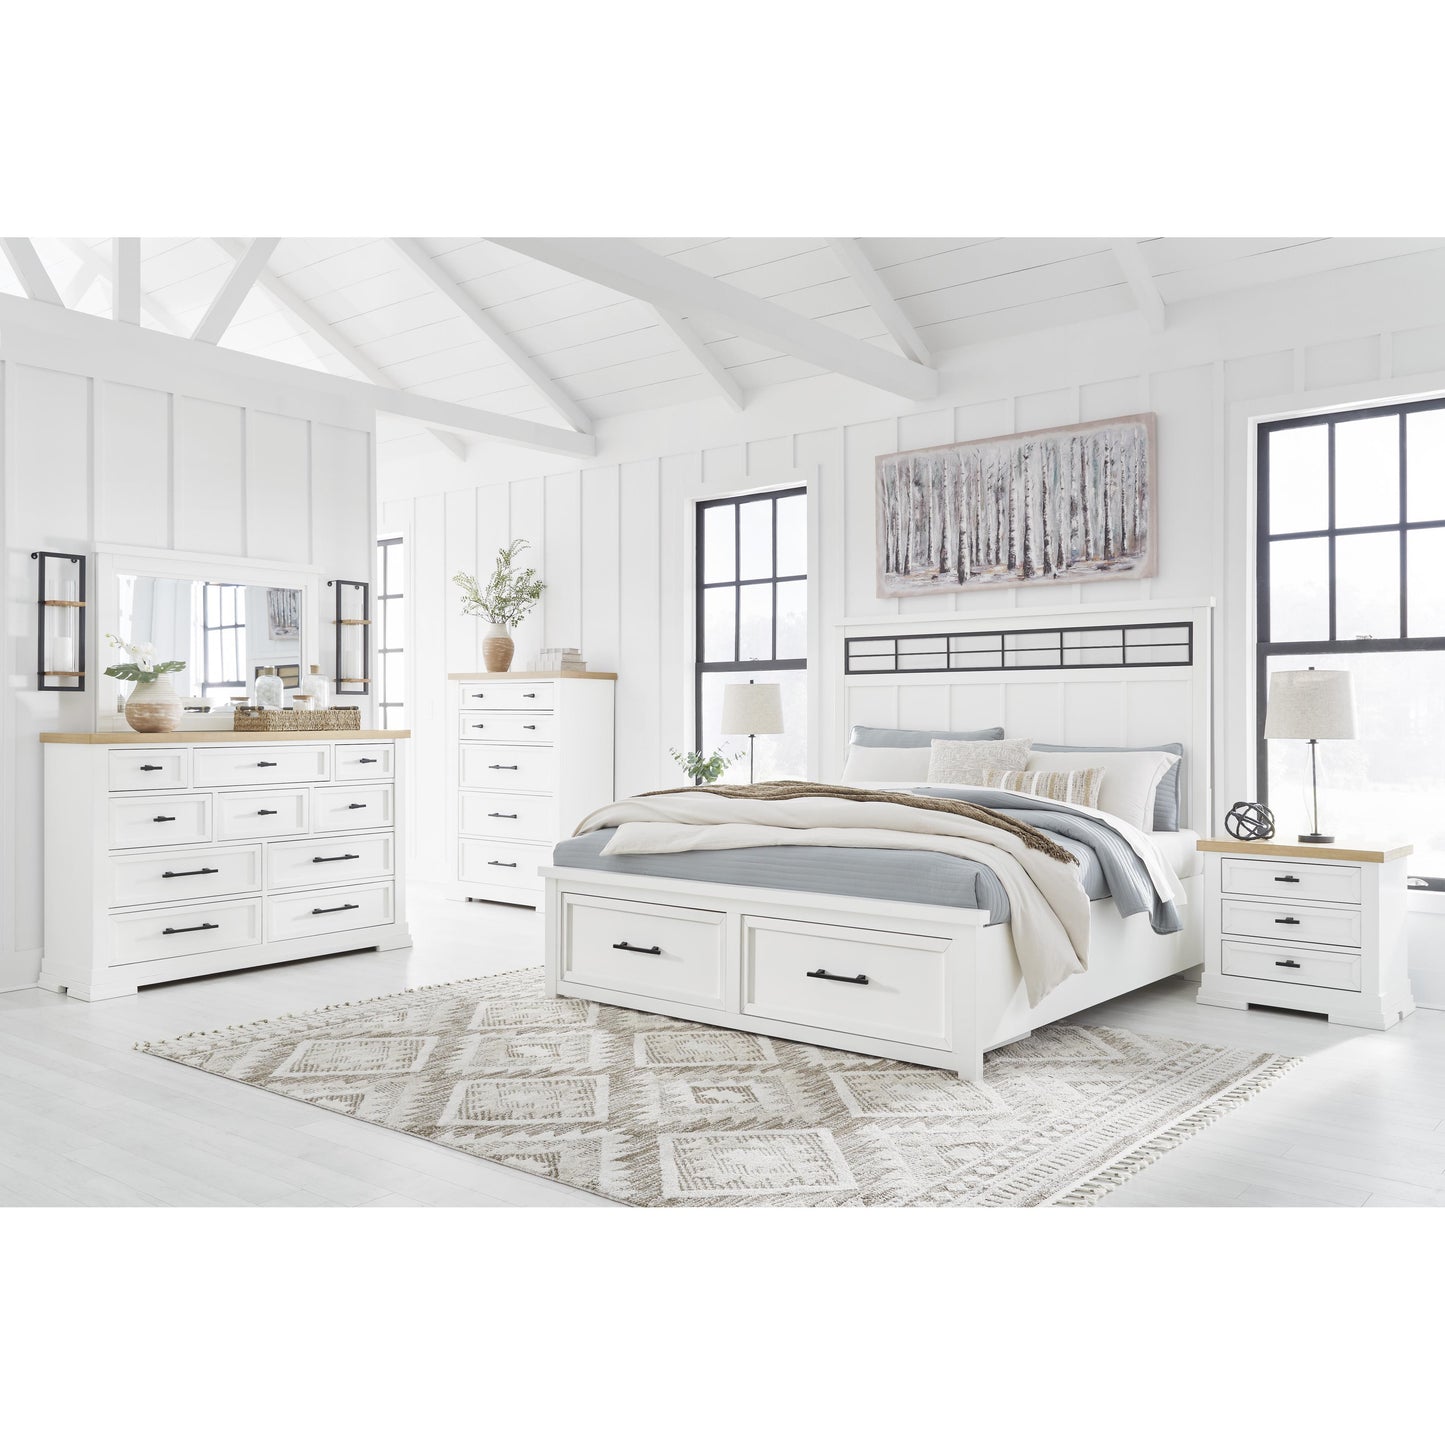 Signature Design by Ashley Ashbryn Queen Panel Bed with Storage B844-57/B844-54S/B844-97 IMAGE 7